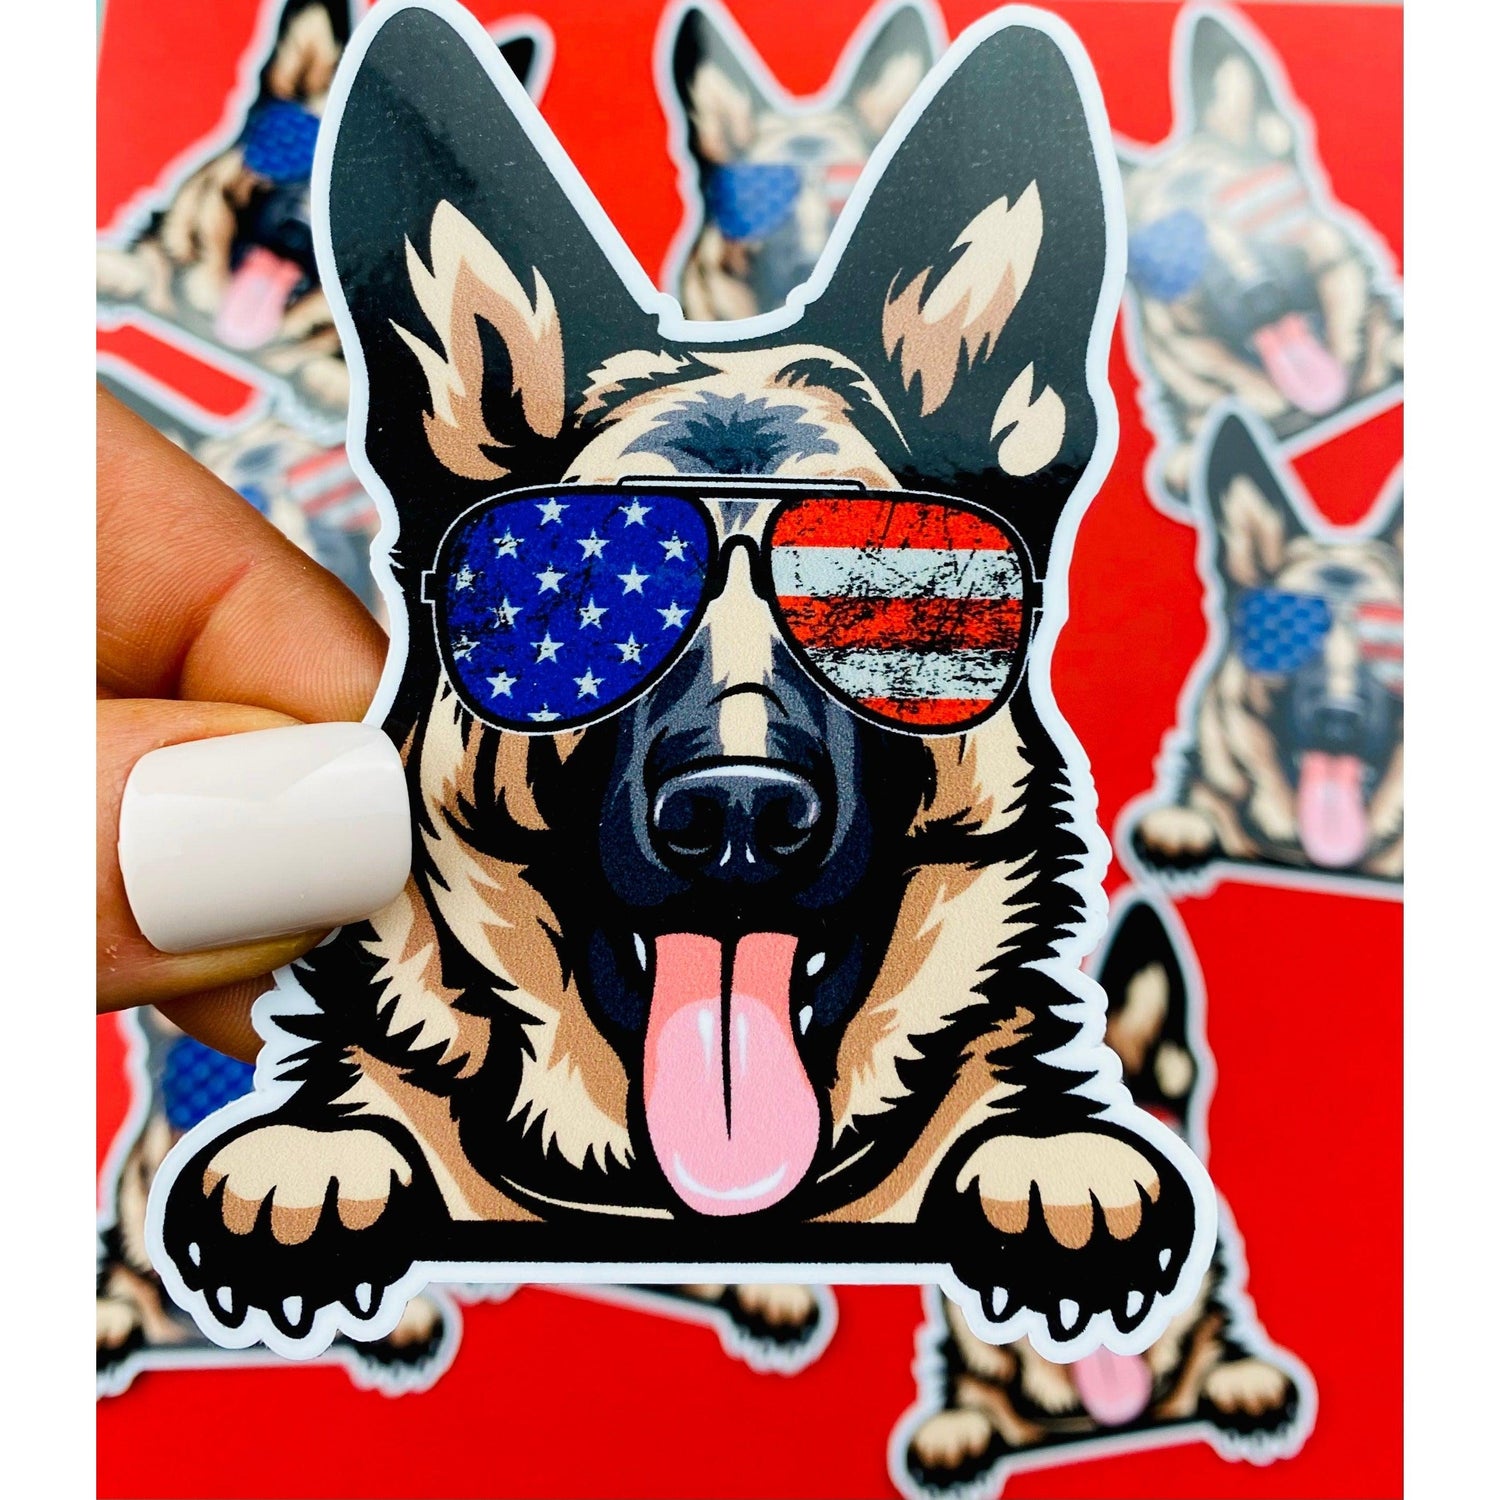 K9 Sticker German Shephed Paws Sticker Cute GSD Dog Decal for Car, Hydroflask, Schutzhund, American Flag Aviators - Ottos Grotto :: Stickers For Your Stuff